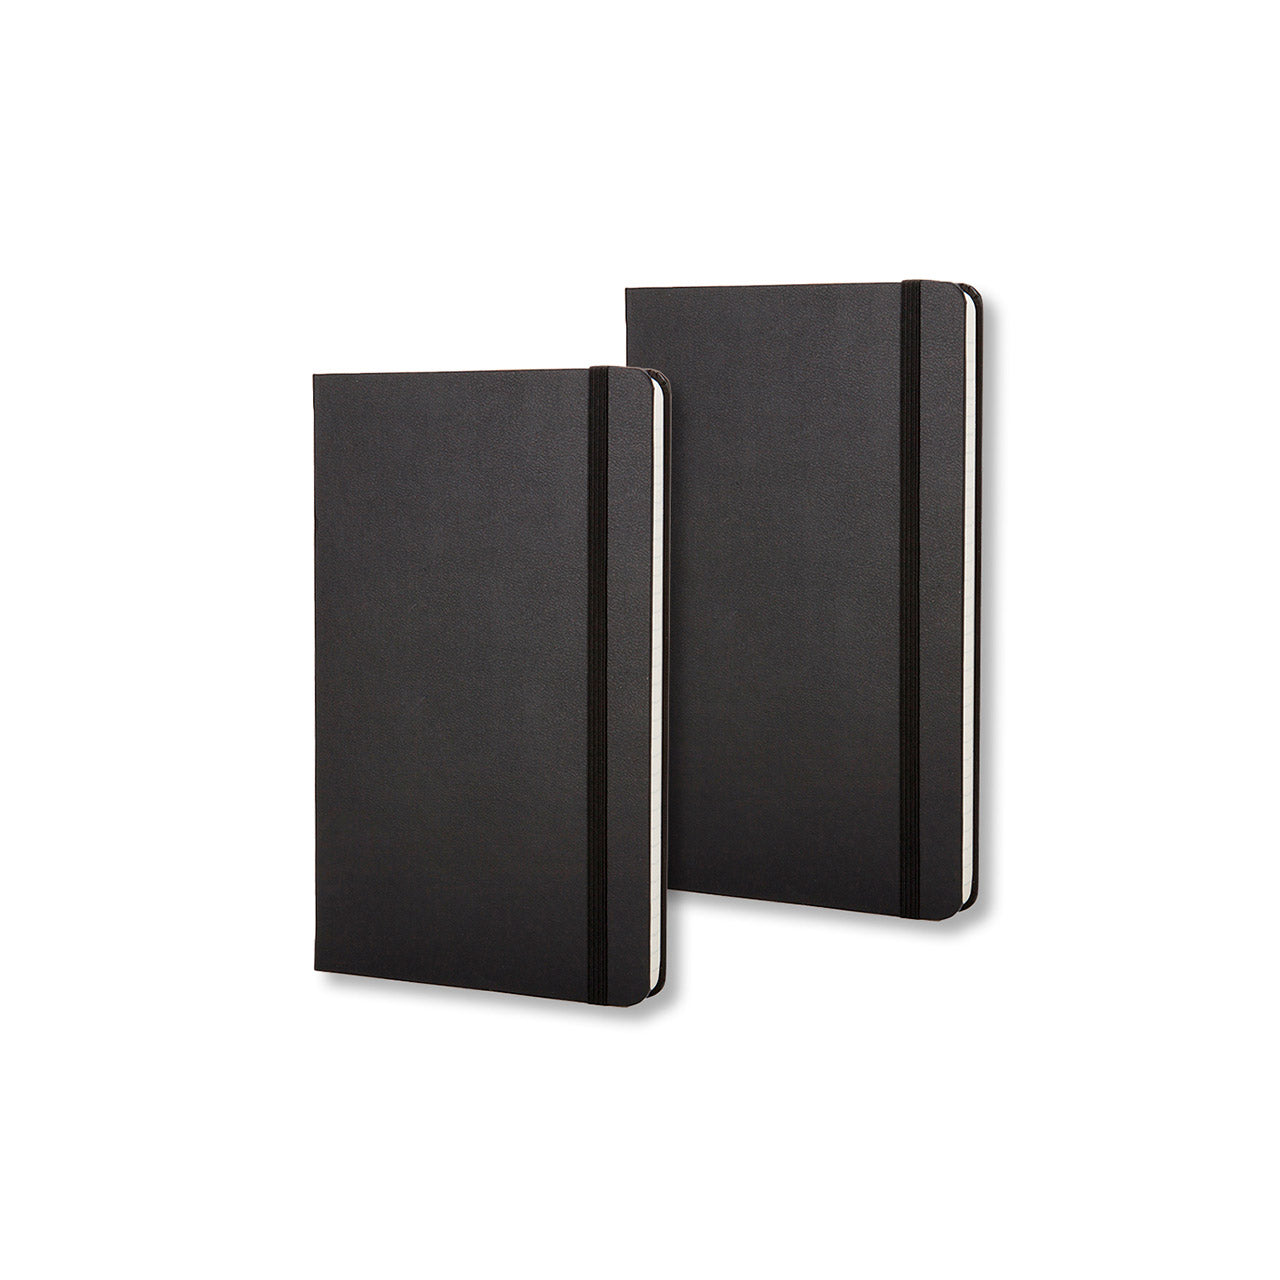 Classic Pocket Hard Cover Notebook 2 for 1 Value Pack